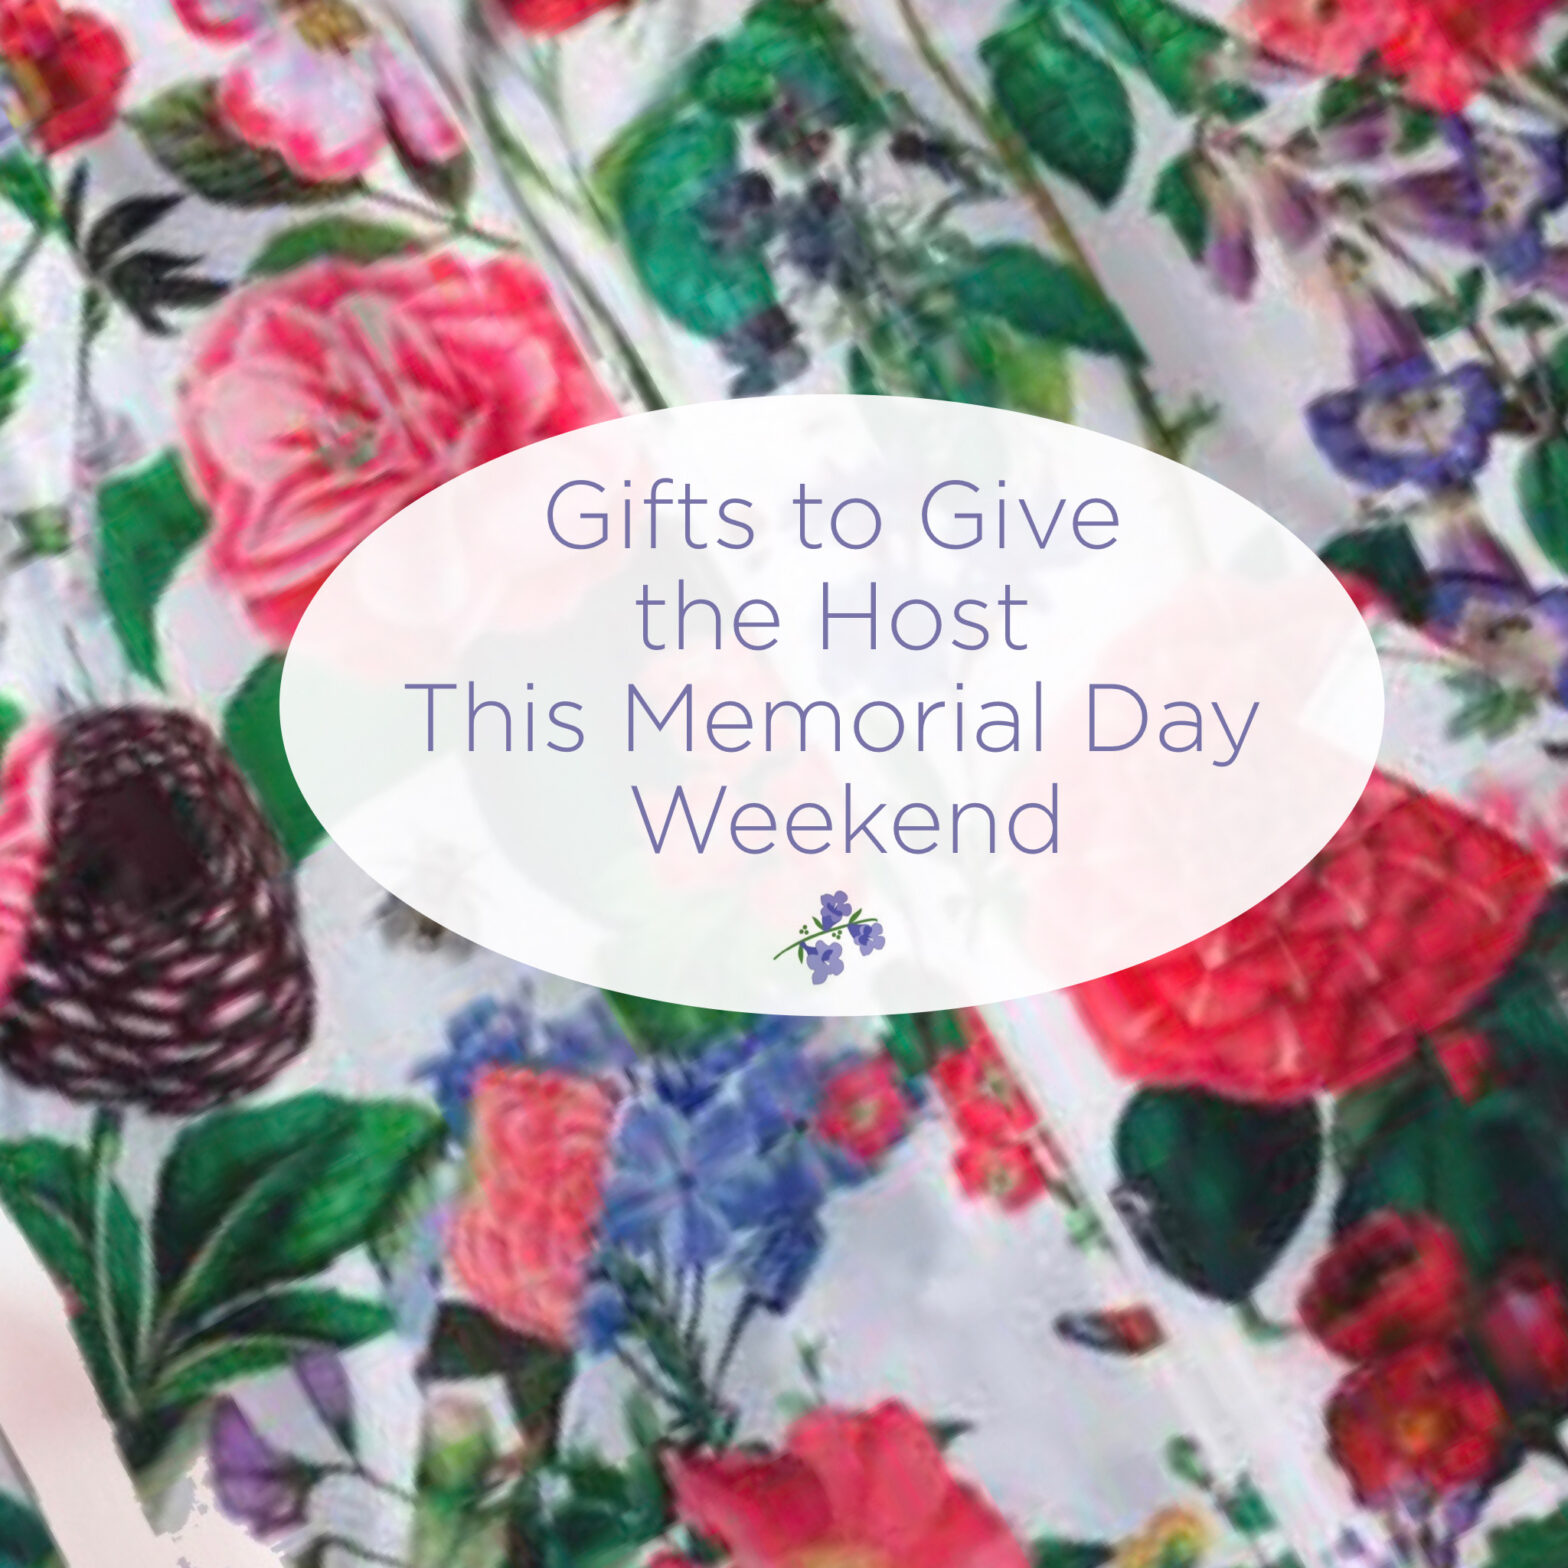 Gifts to Give Your Friend Who Is Hosting You for Memorial Day Weekend